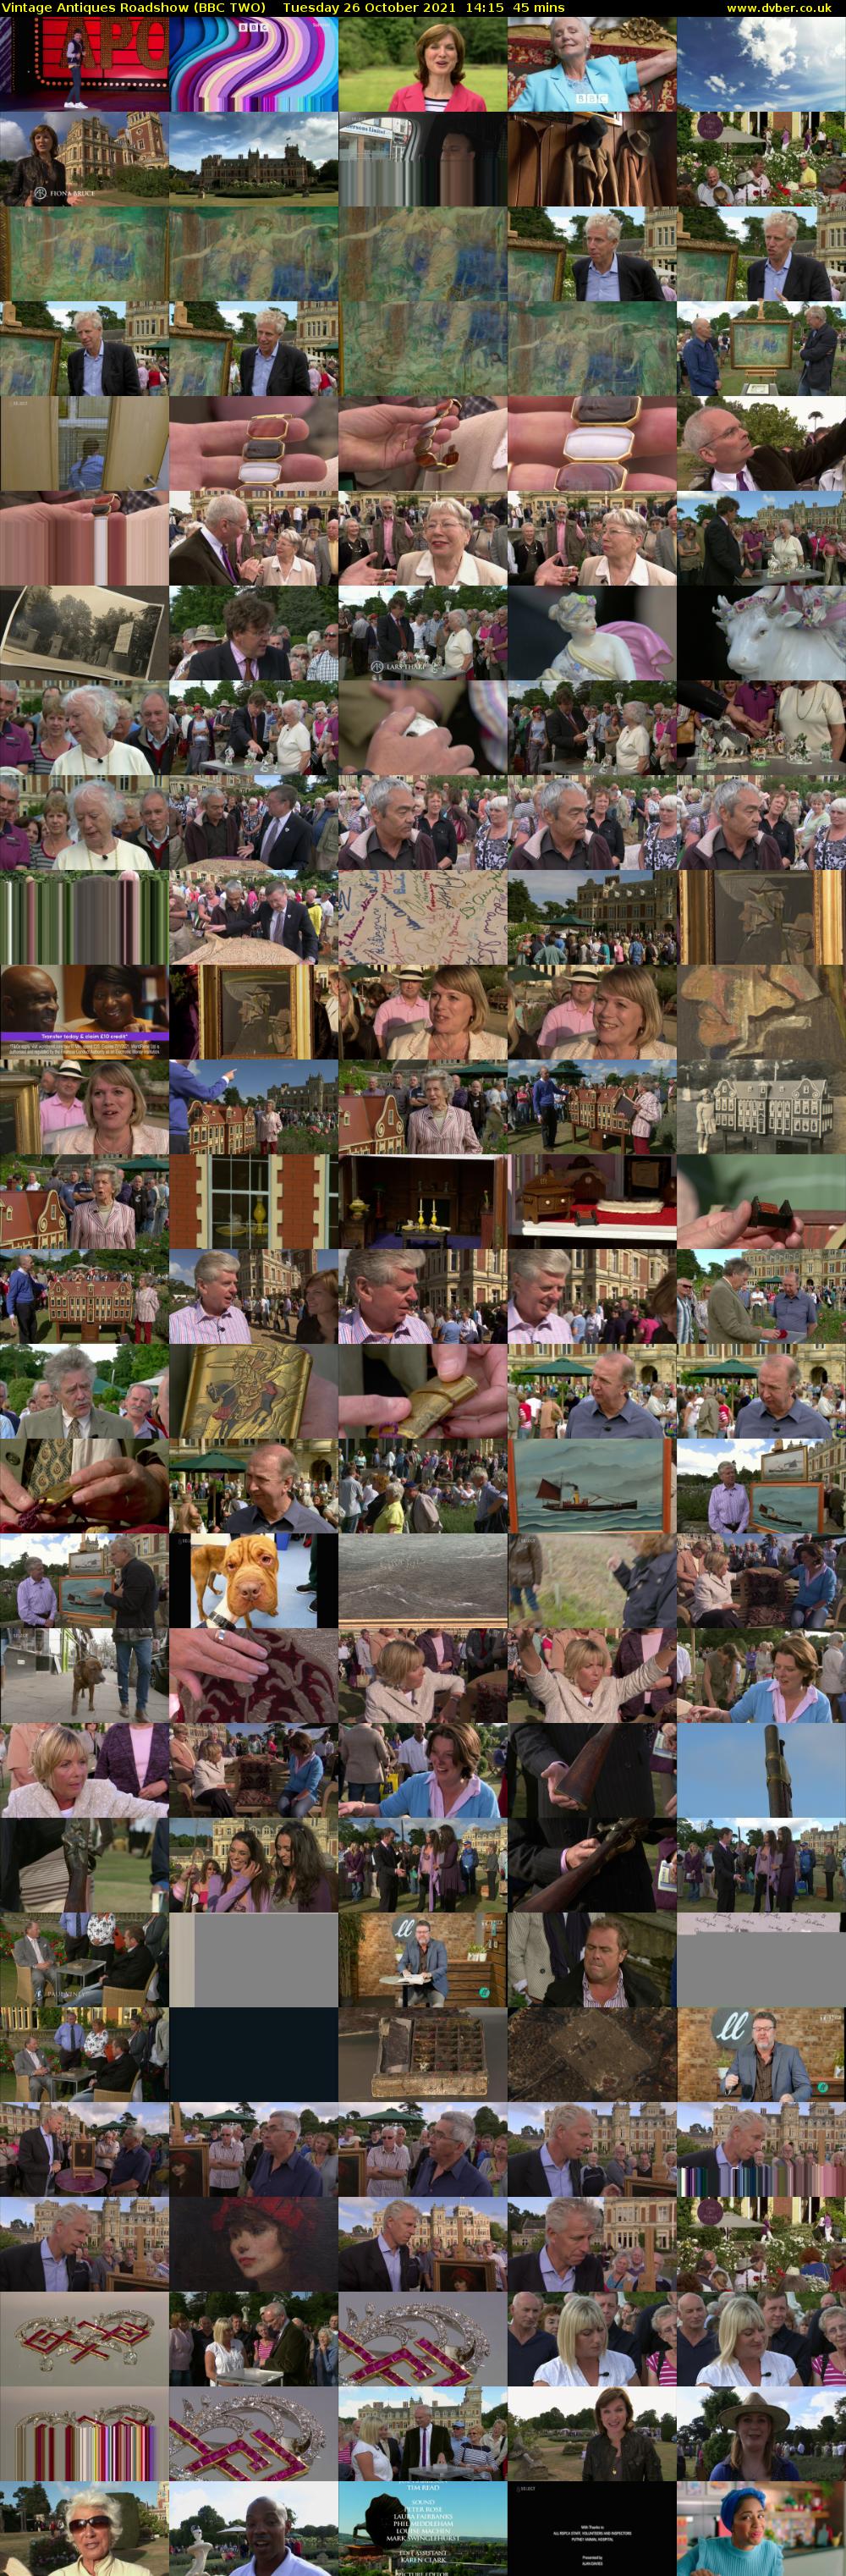 Vintage Antiques Roadshow (BBC TWO) Tuesday 26 October 2021 14:15 - 15:00